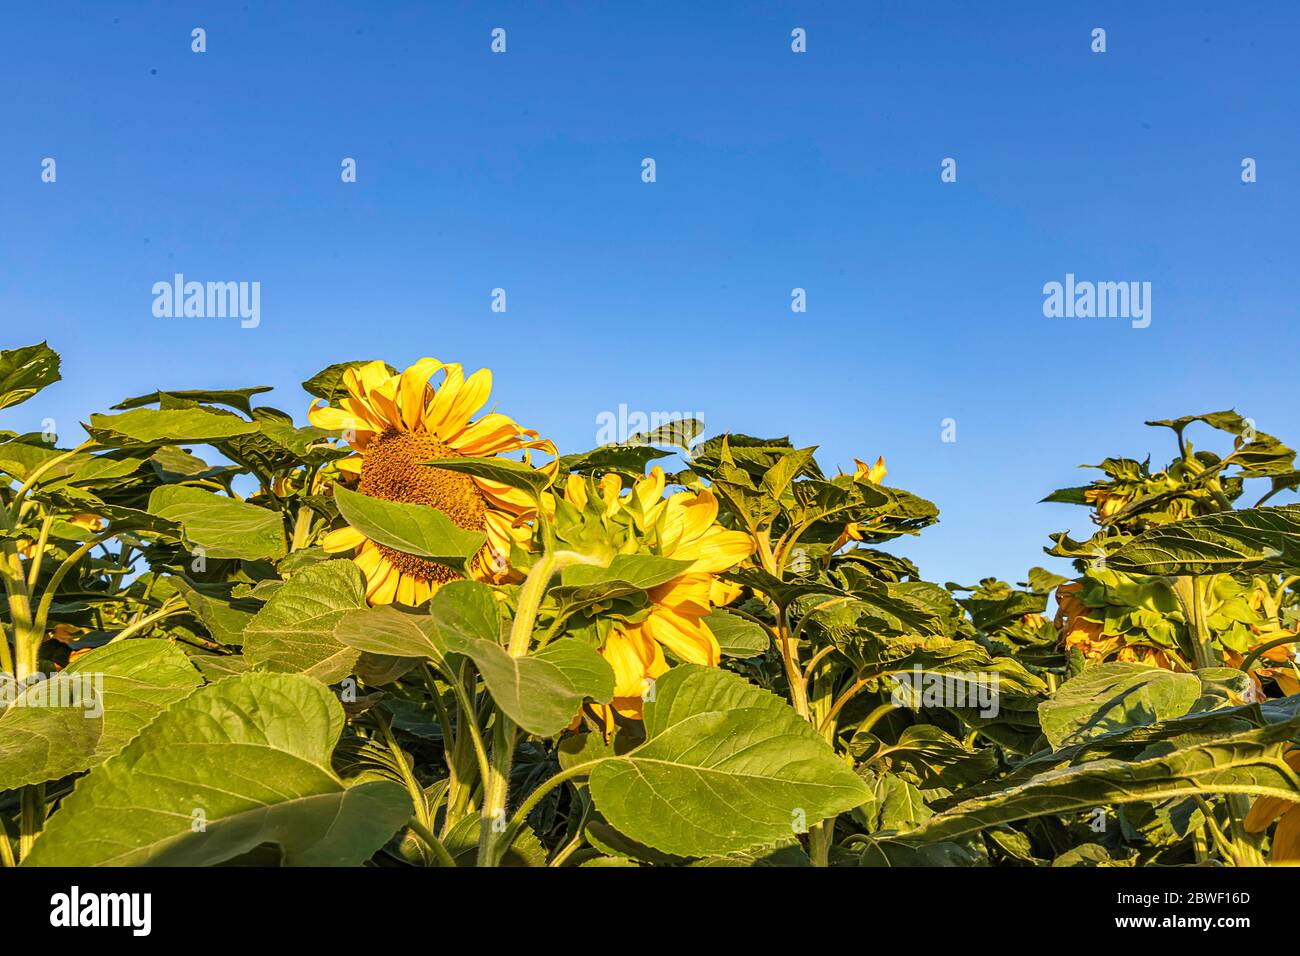 Blooming sunflower flower heads close-up against sky and green foliage Stock Photo